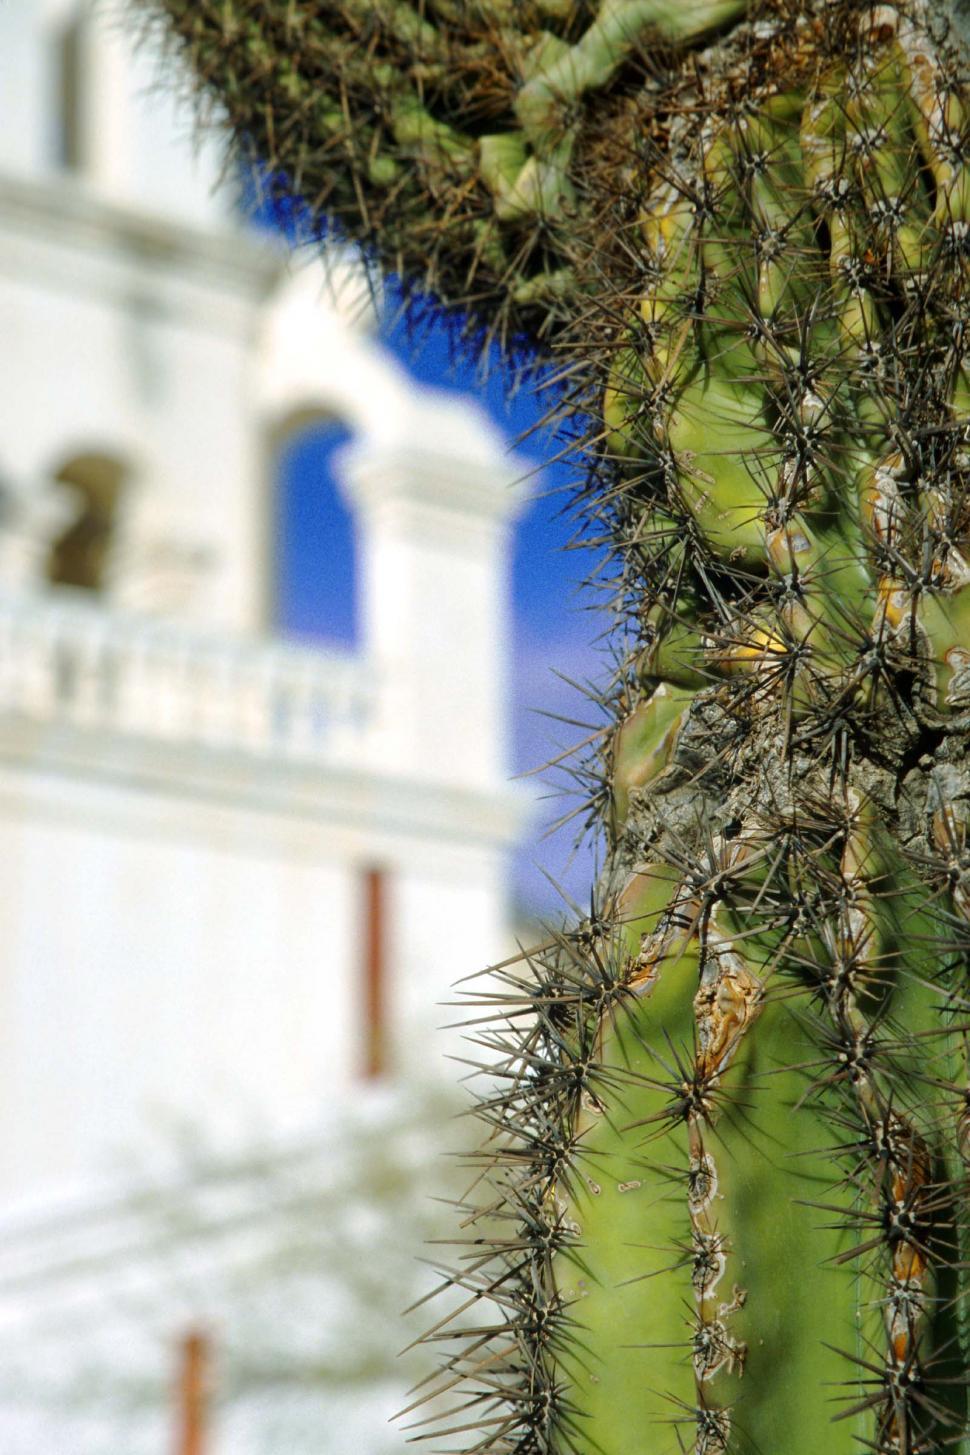 Free Image of Cactus and Mission San Xavier del Bac 